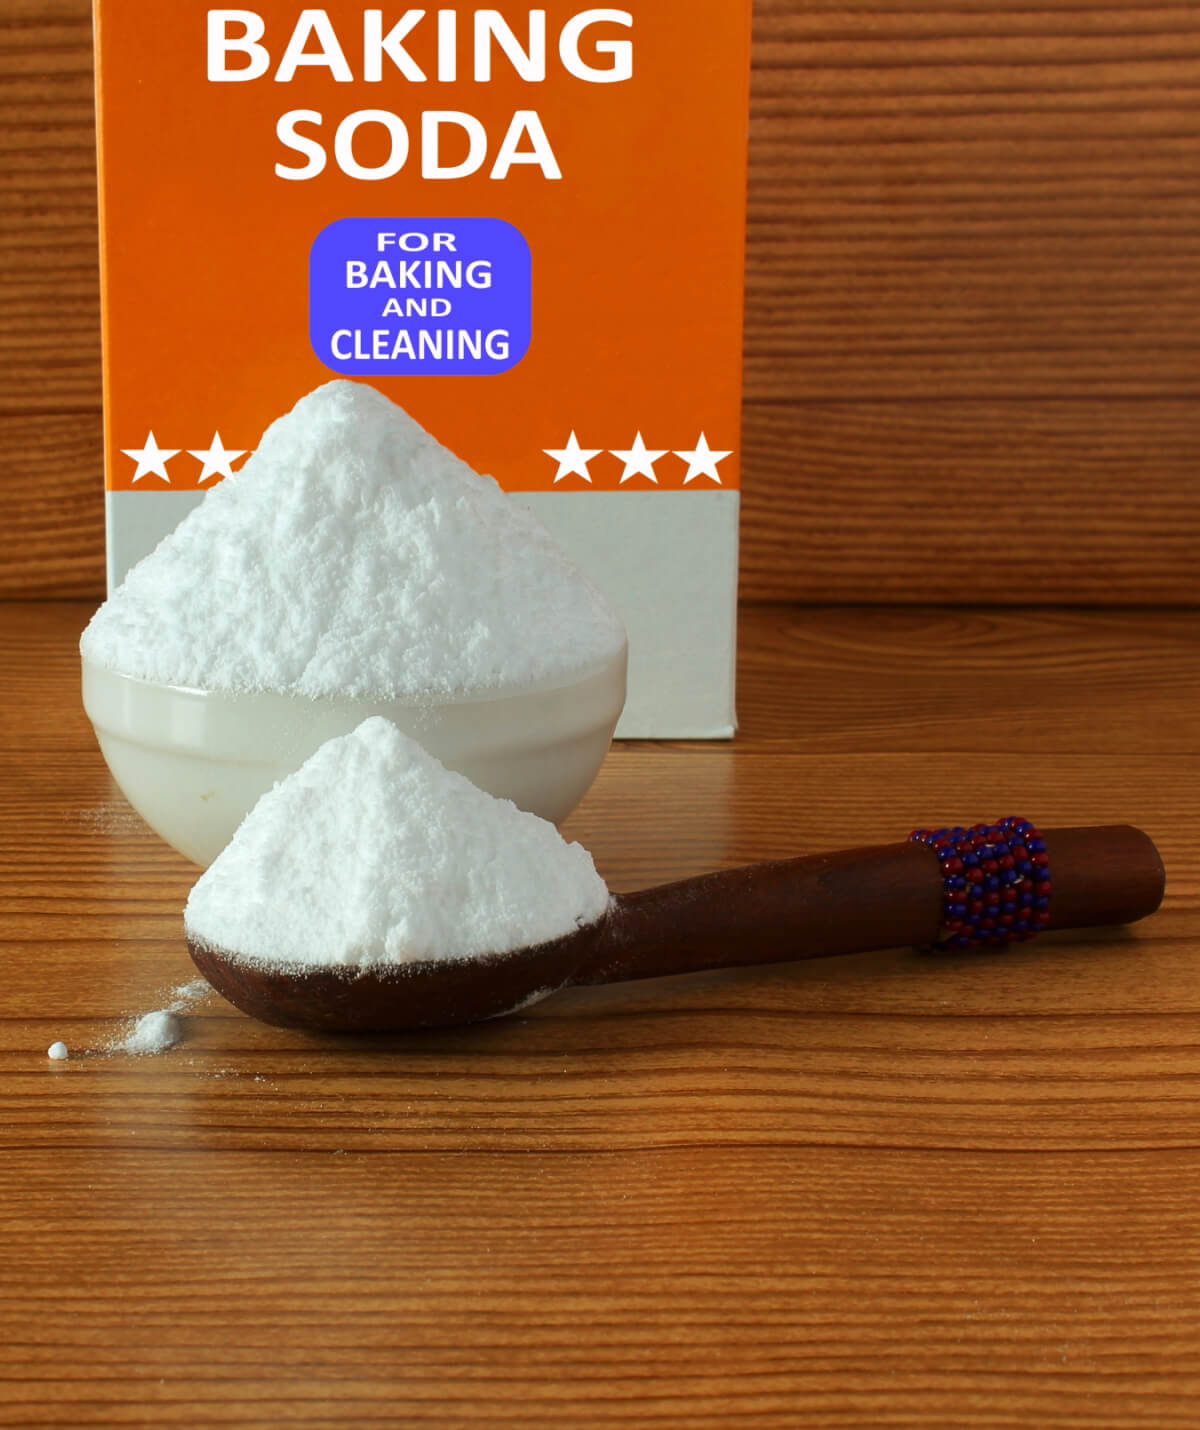 In 5 Frugal & Natural Garden Tips, there are tips to use baking soda in your garden.